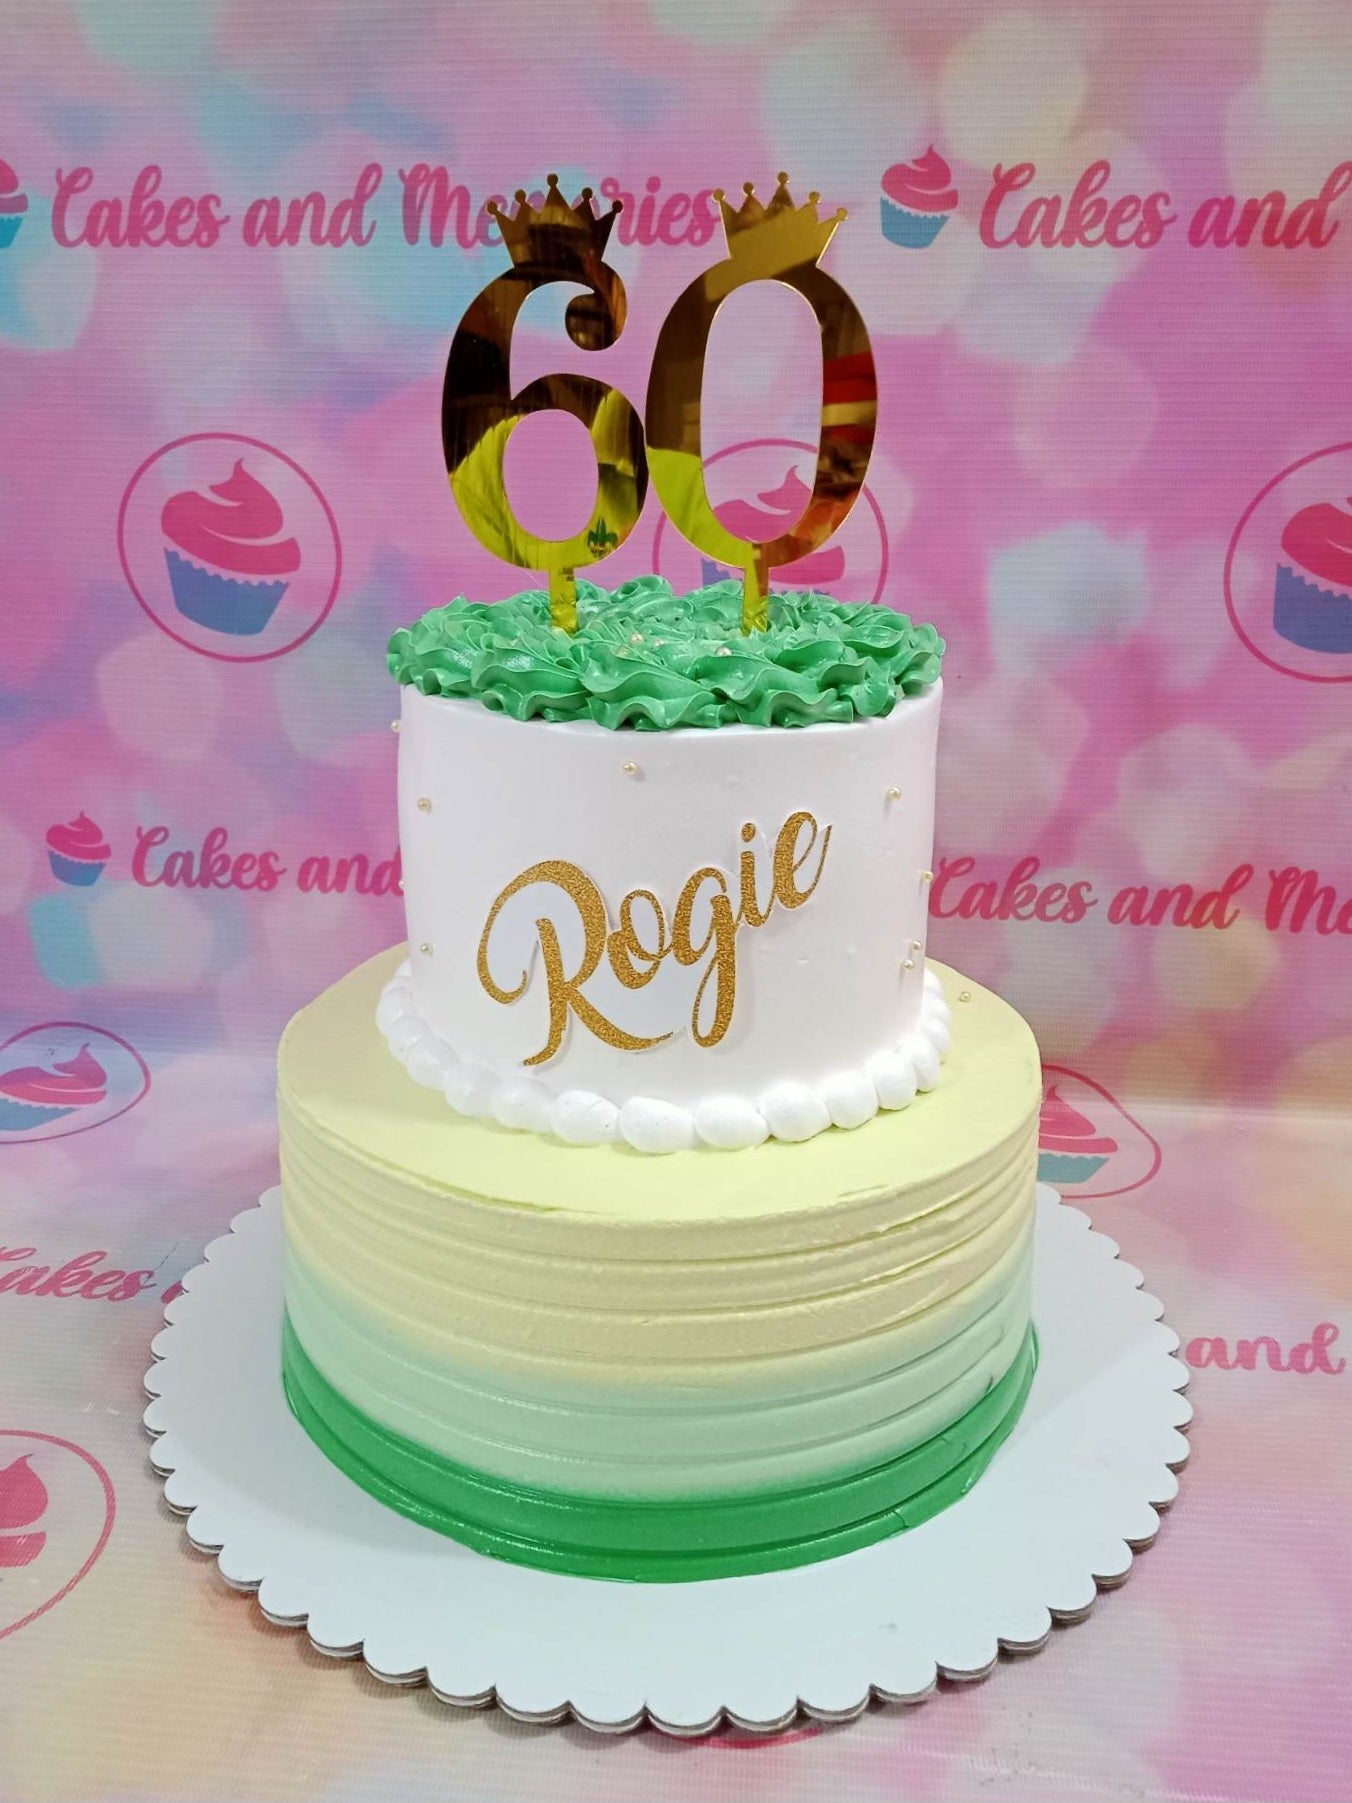 This stunning Fifty Cake is the perfect way to celebrate a milestone birthday. Featuring an ombre design in shades of green and gold, it's finished with a custom topper for a special grandmother or grandfather. Celebrate fifty and sixty in style with this beautiful customized cake!